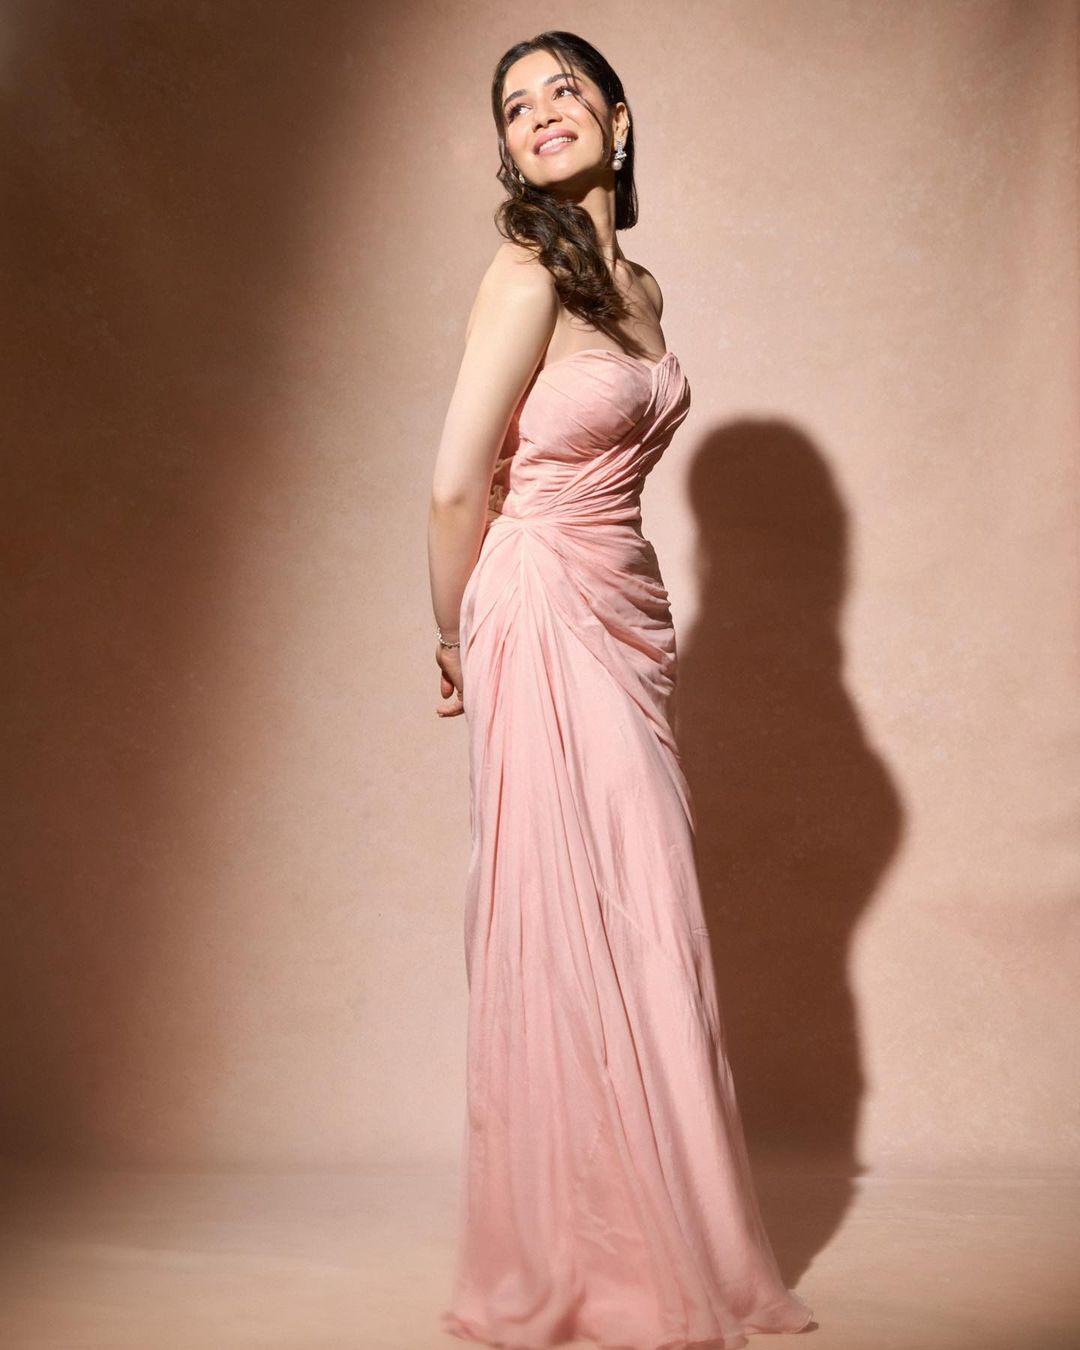 Sara looked absolutely gorgeous in a stunning pastel pink dress with a tube-style silhouette. The strapless design beautifully showcases her fashion flair